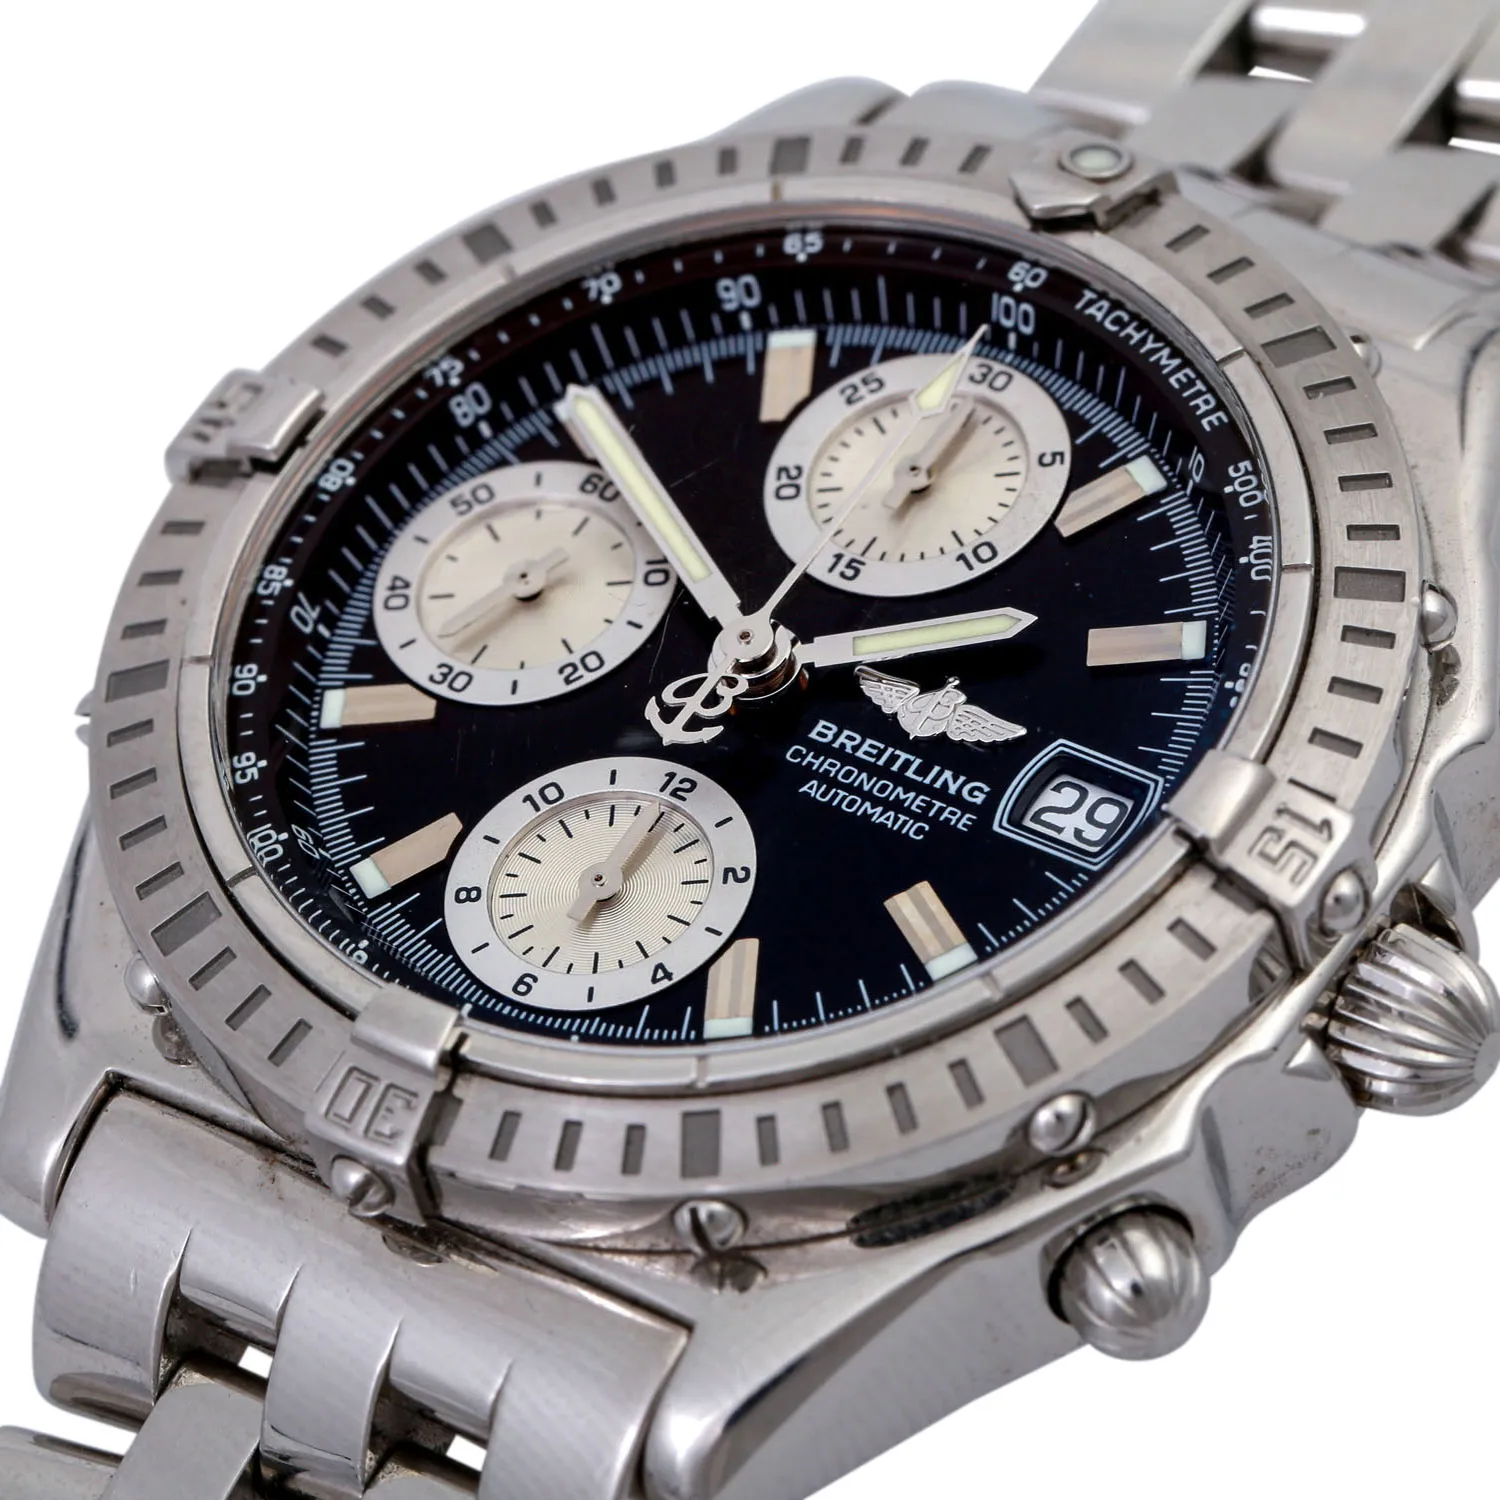 Breitling Chronomat A13352 38mm Stainless steel bi-color black and silver 4